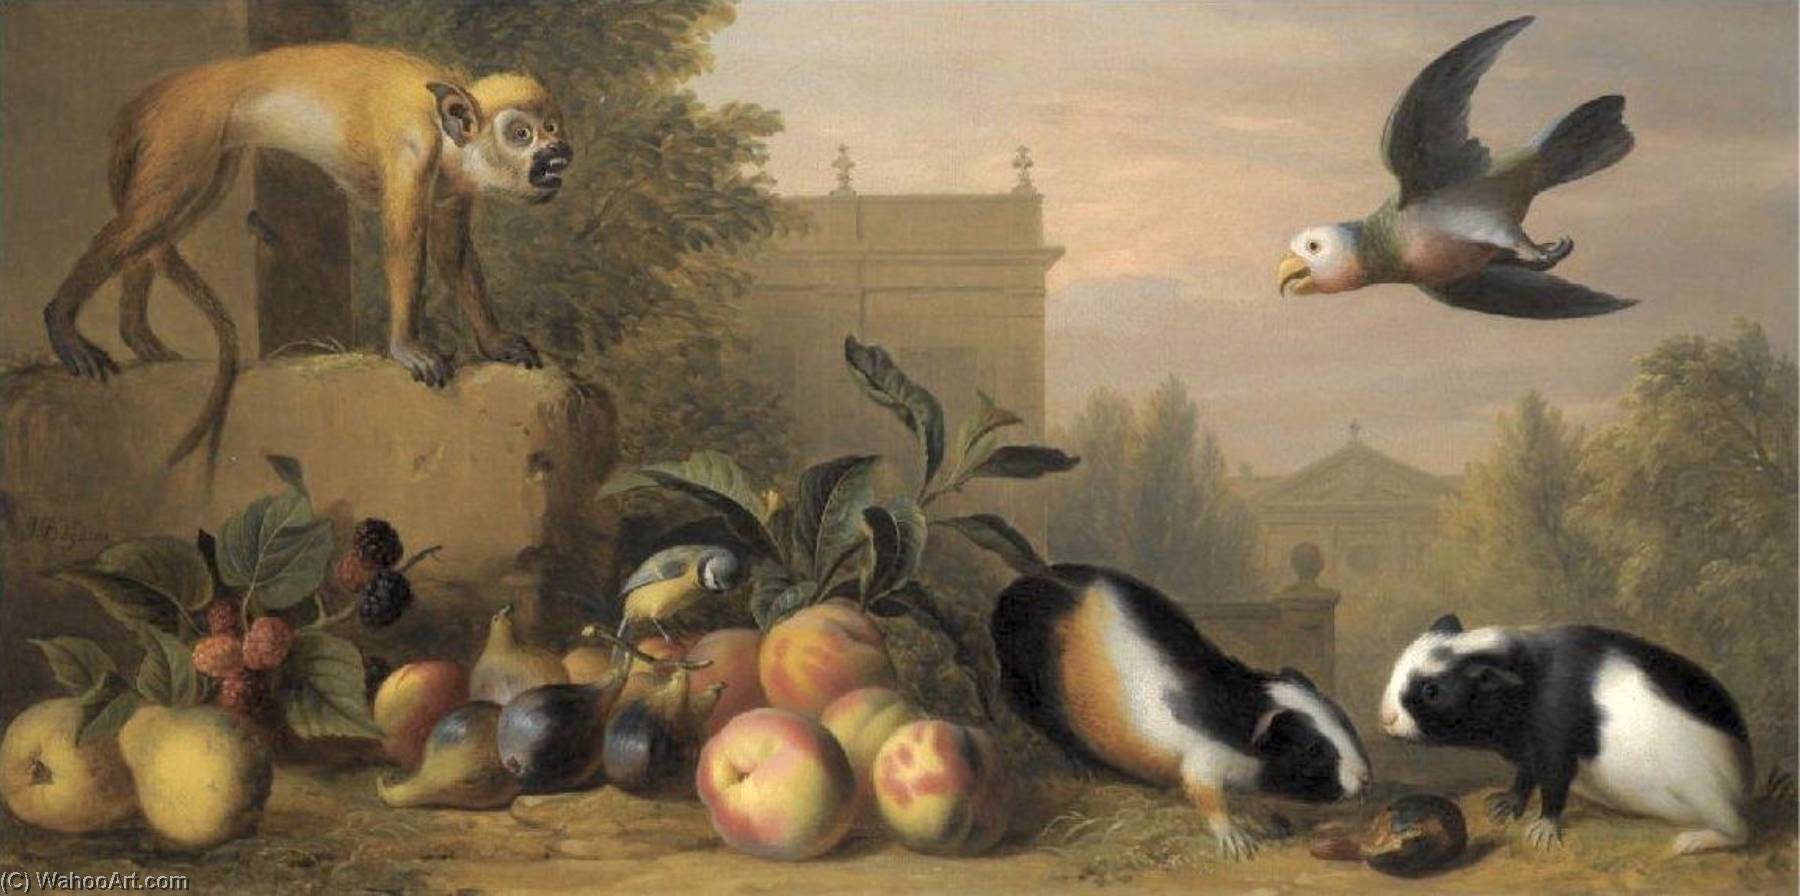 WikiOO.org - دایره المعارف هنرهای زیبا - نقاشی، آثار هنری Jakob Bogdani - Capuchin squirrel monkey, two guinea pigs, a blue tit and an Amazon St. Vincent parrot with Peaches, Figs and Pears in a landscape